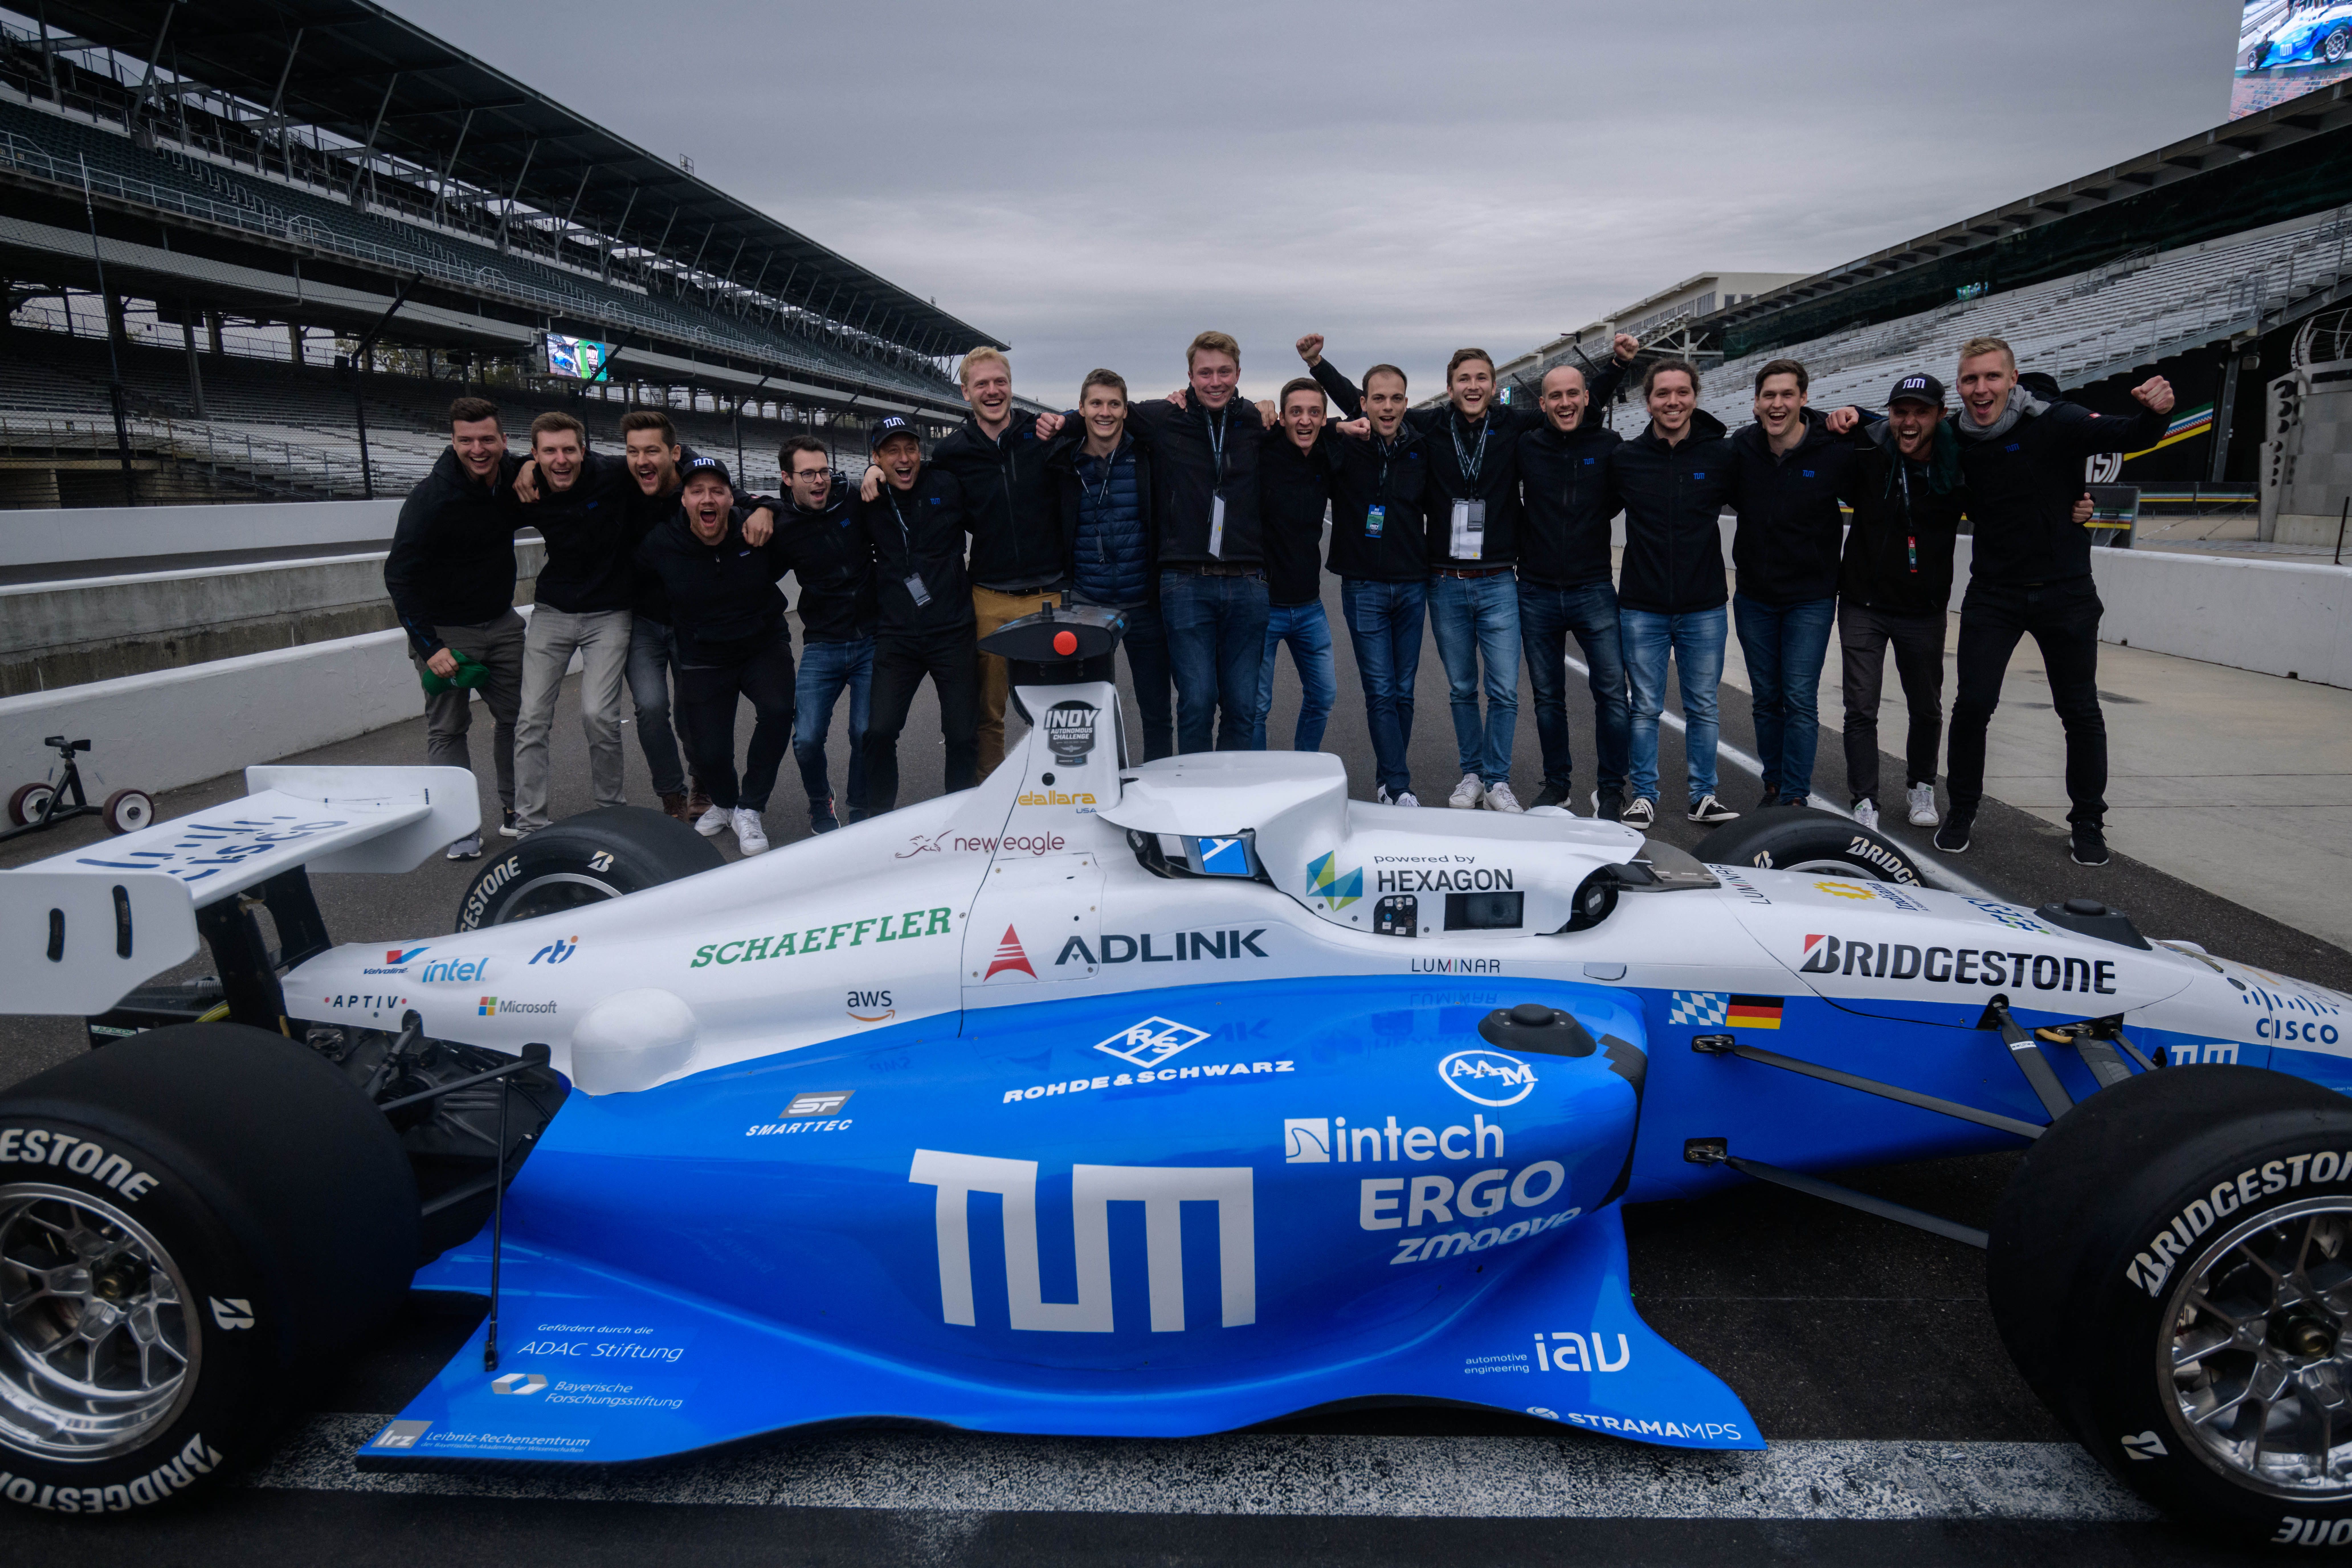  Team members of TUM Autonomous Motorsport pose for photos after winning the Indy Autonomous Challenge race at the Indianapolis Speedway in Indianapolis on October 23